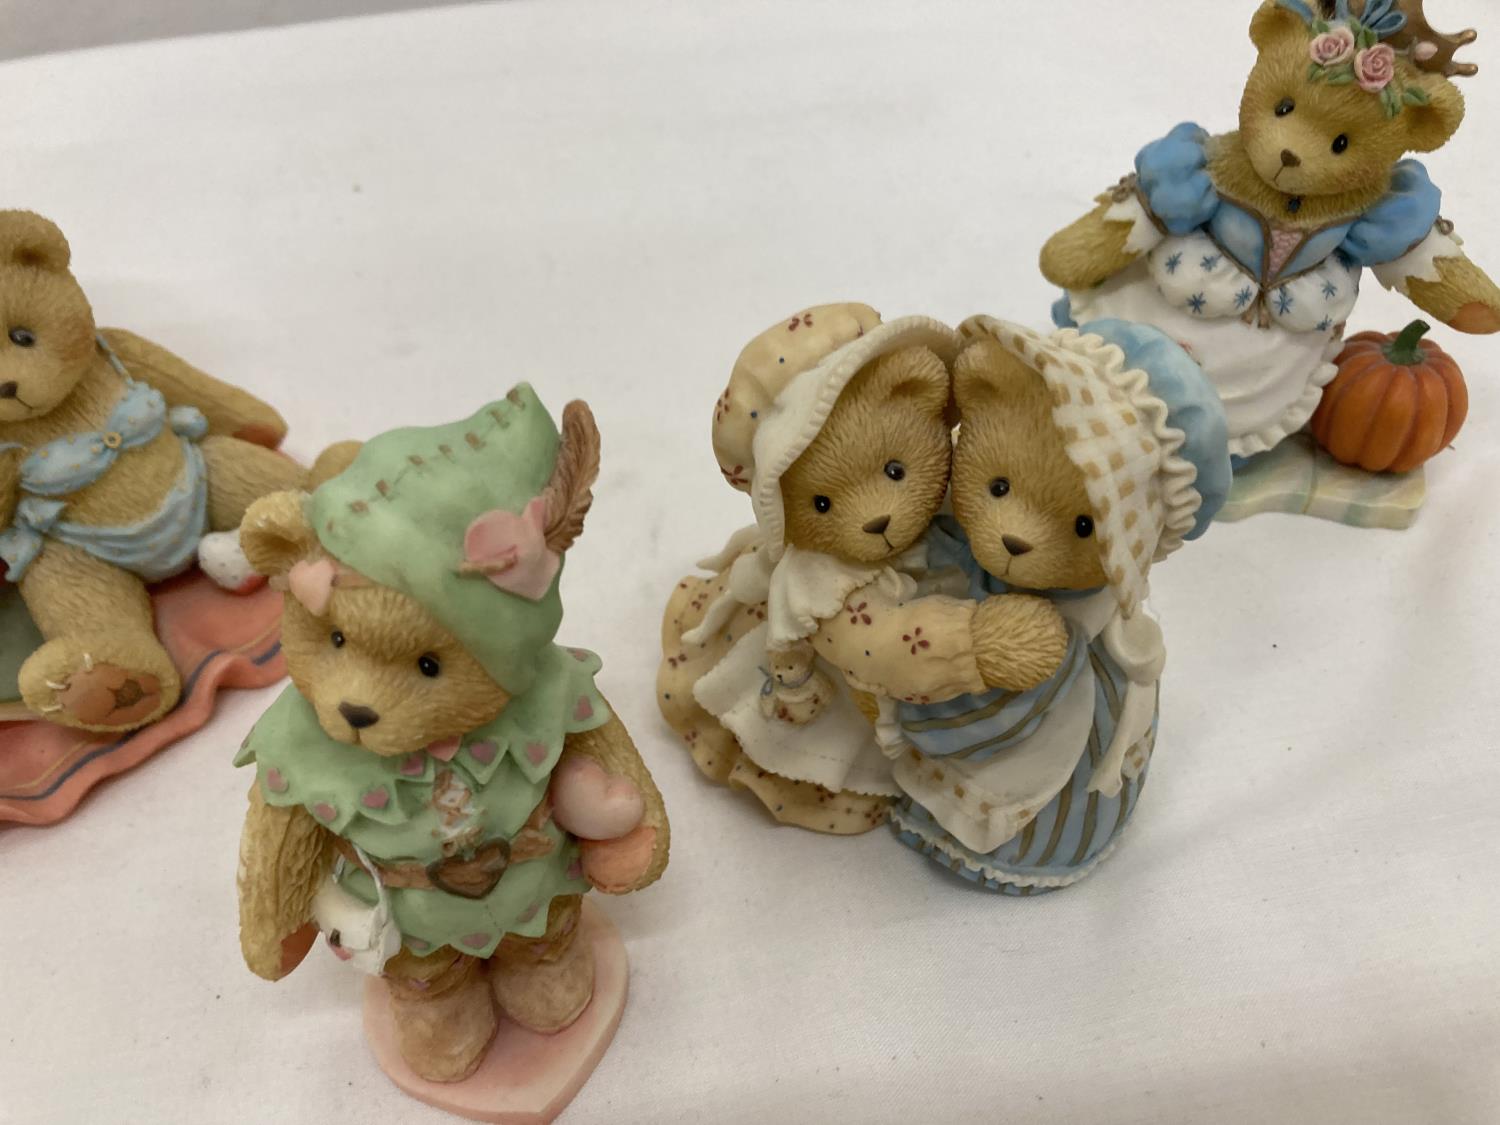 FOUR LIMITED EDITION CHERISHED TEDDIES, 'CHRISTINA', 'ROBIN', 'HALEY AND LOGAN', AND 'JUDY' - Image 8 of 12